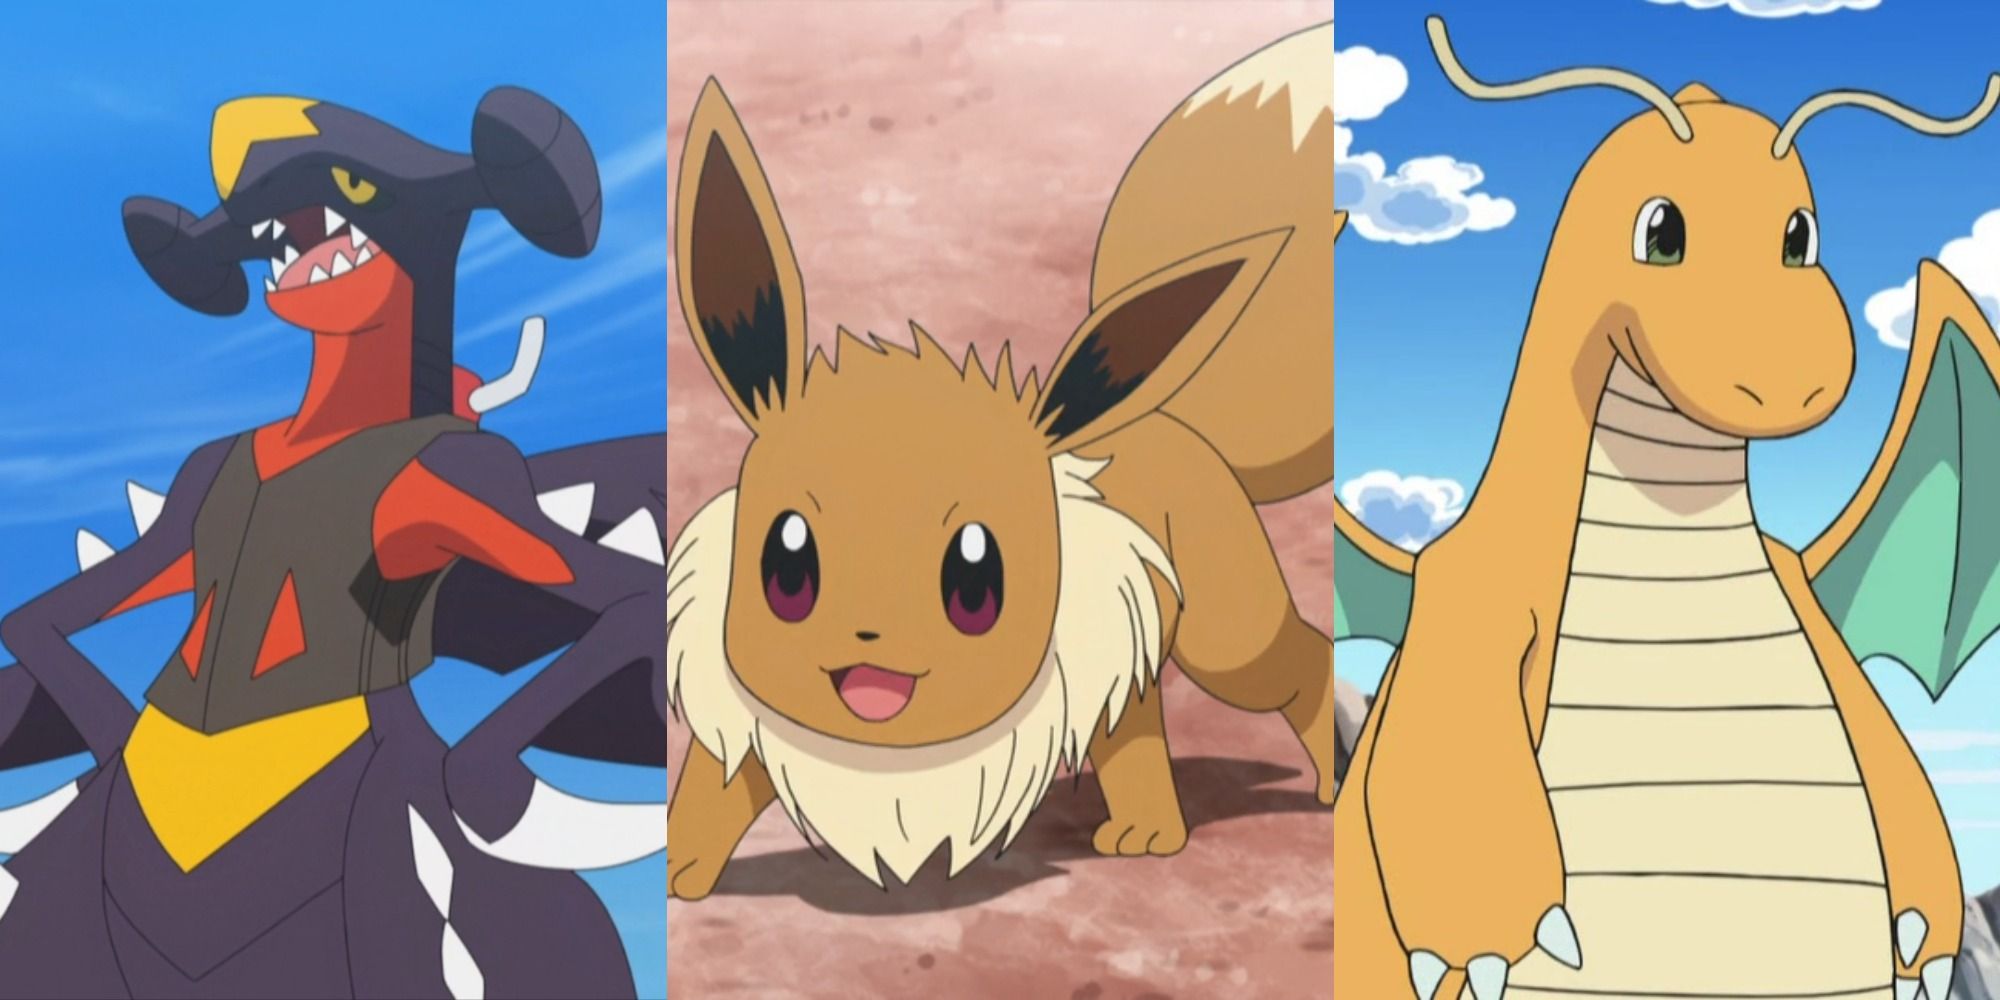 Split image showing Garchomp, Eevee, and Dragonite in the Pokémon anime.